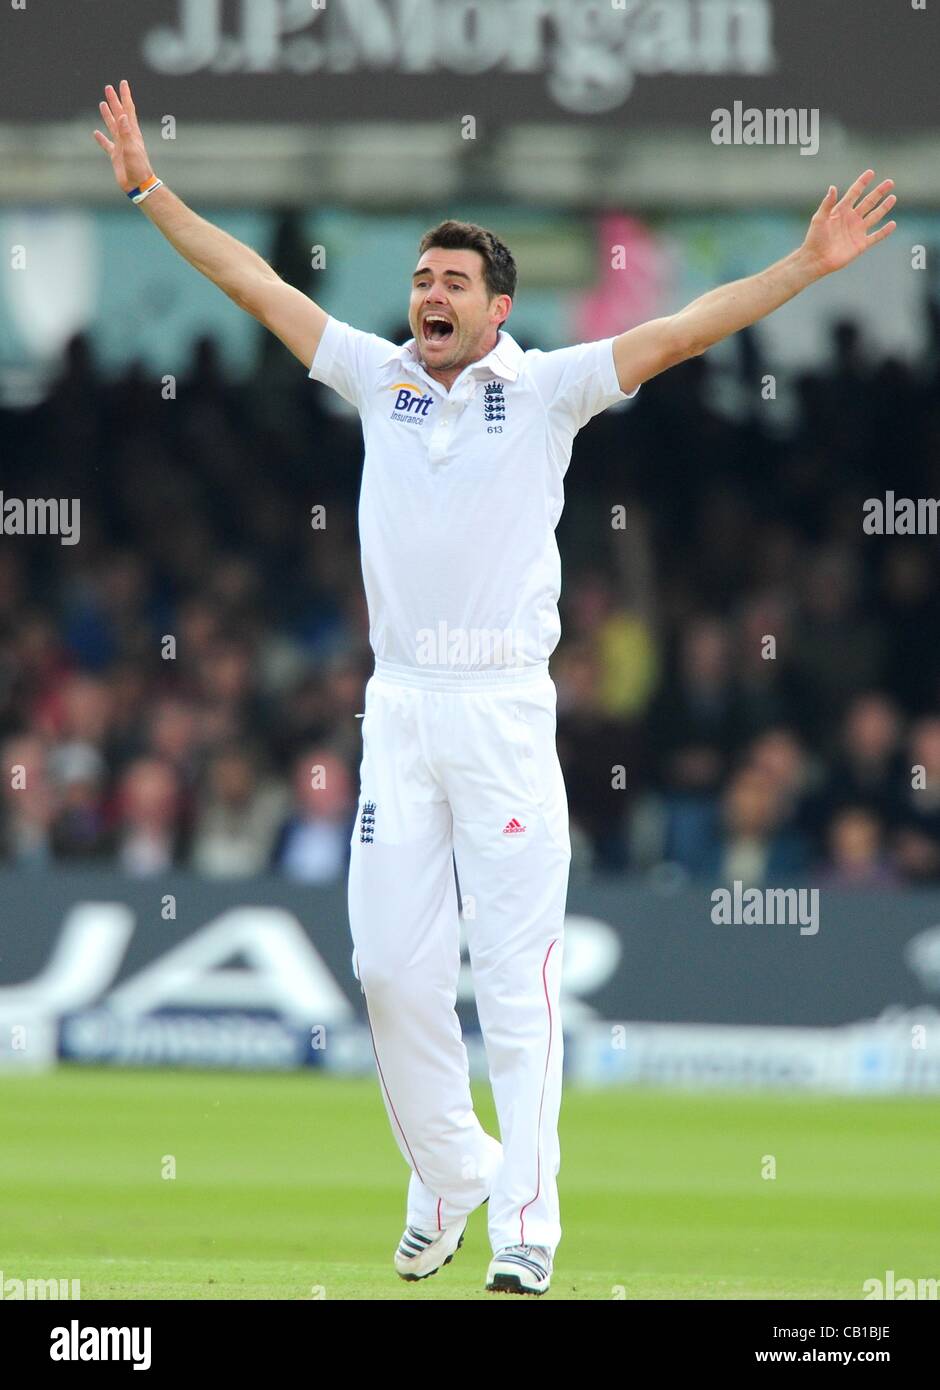 19.05.2012 London, England.  Jimmy Anderson in action during the First Test between England and West Indies from Lords. Stock Photo